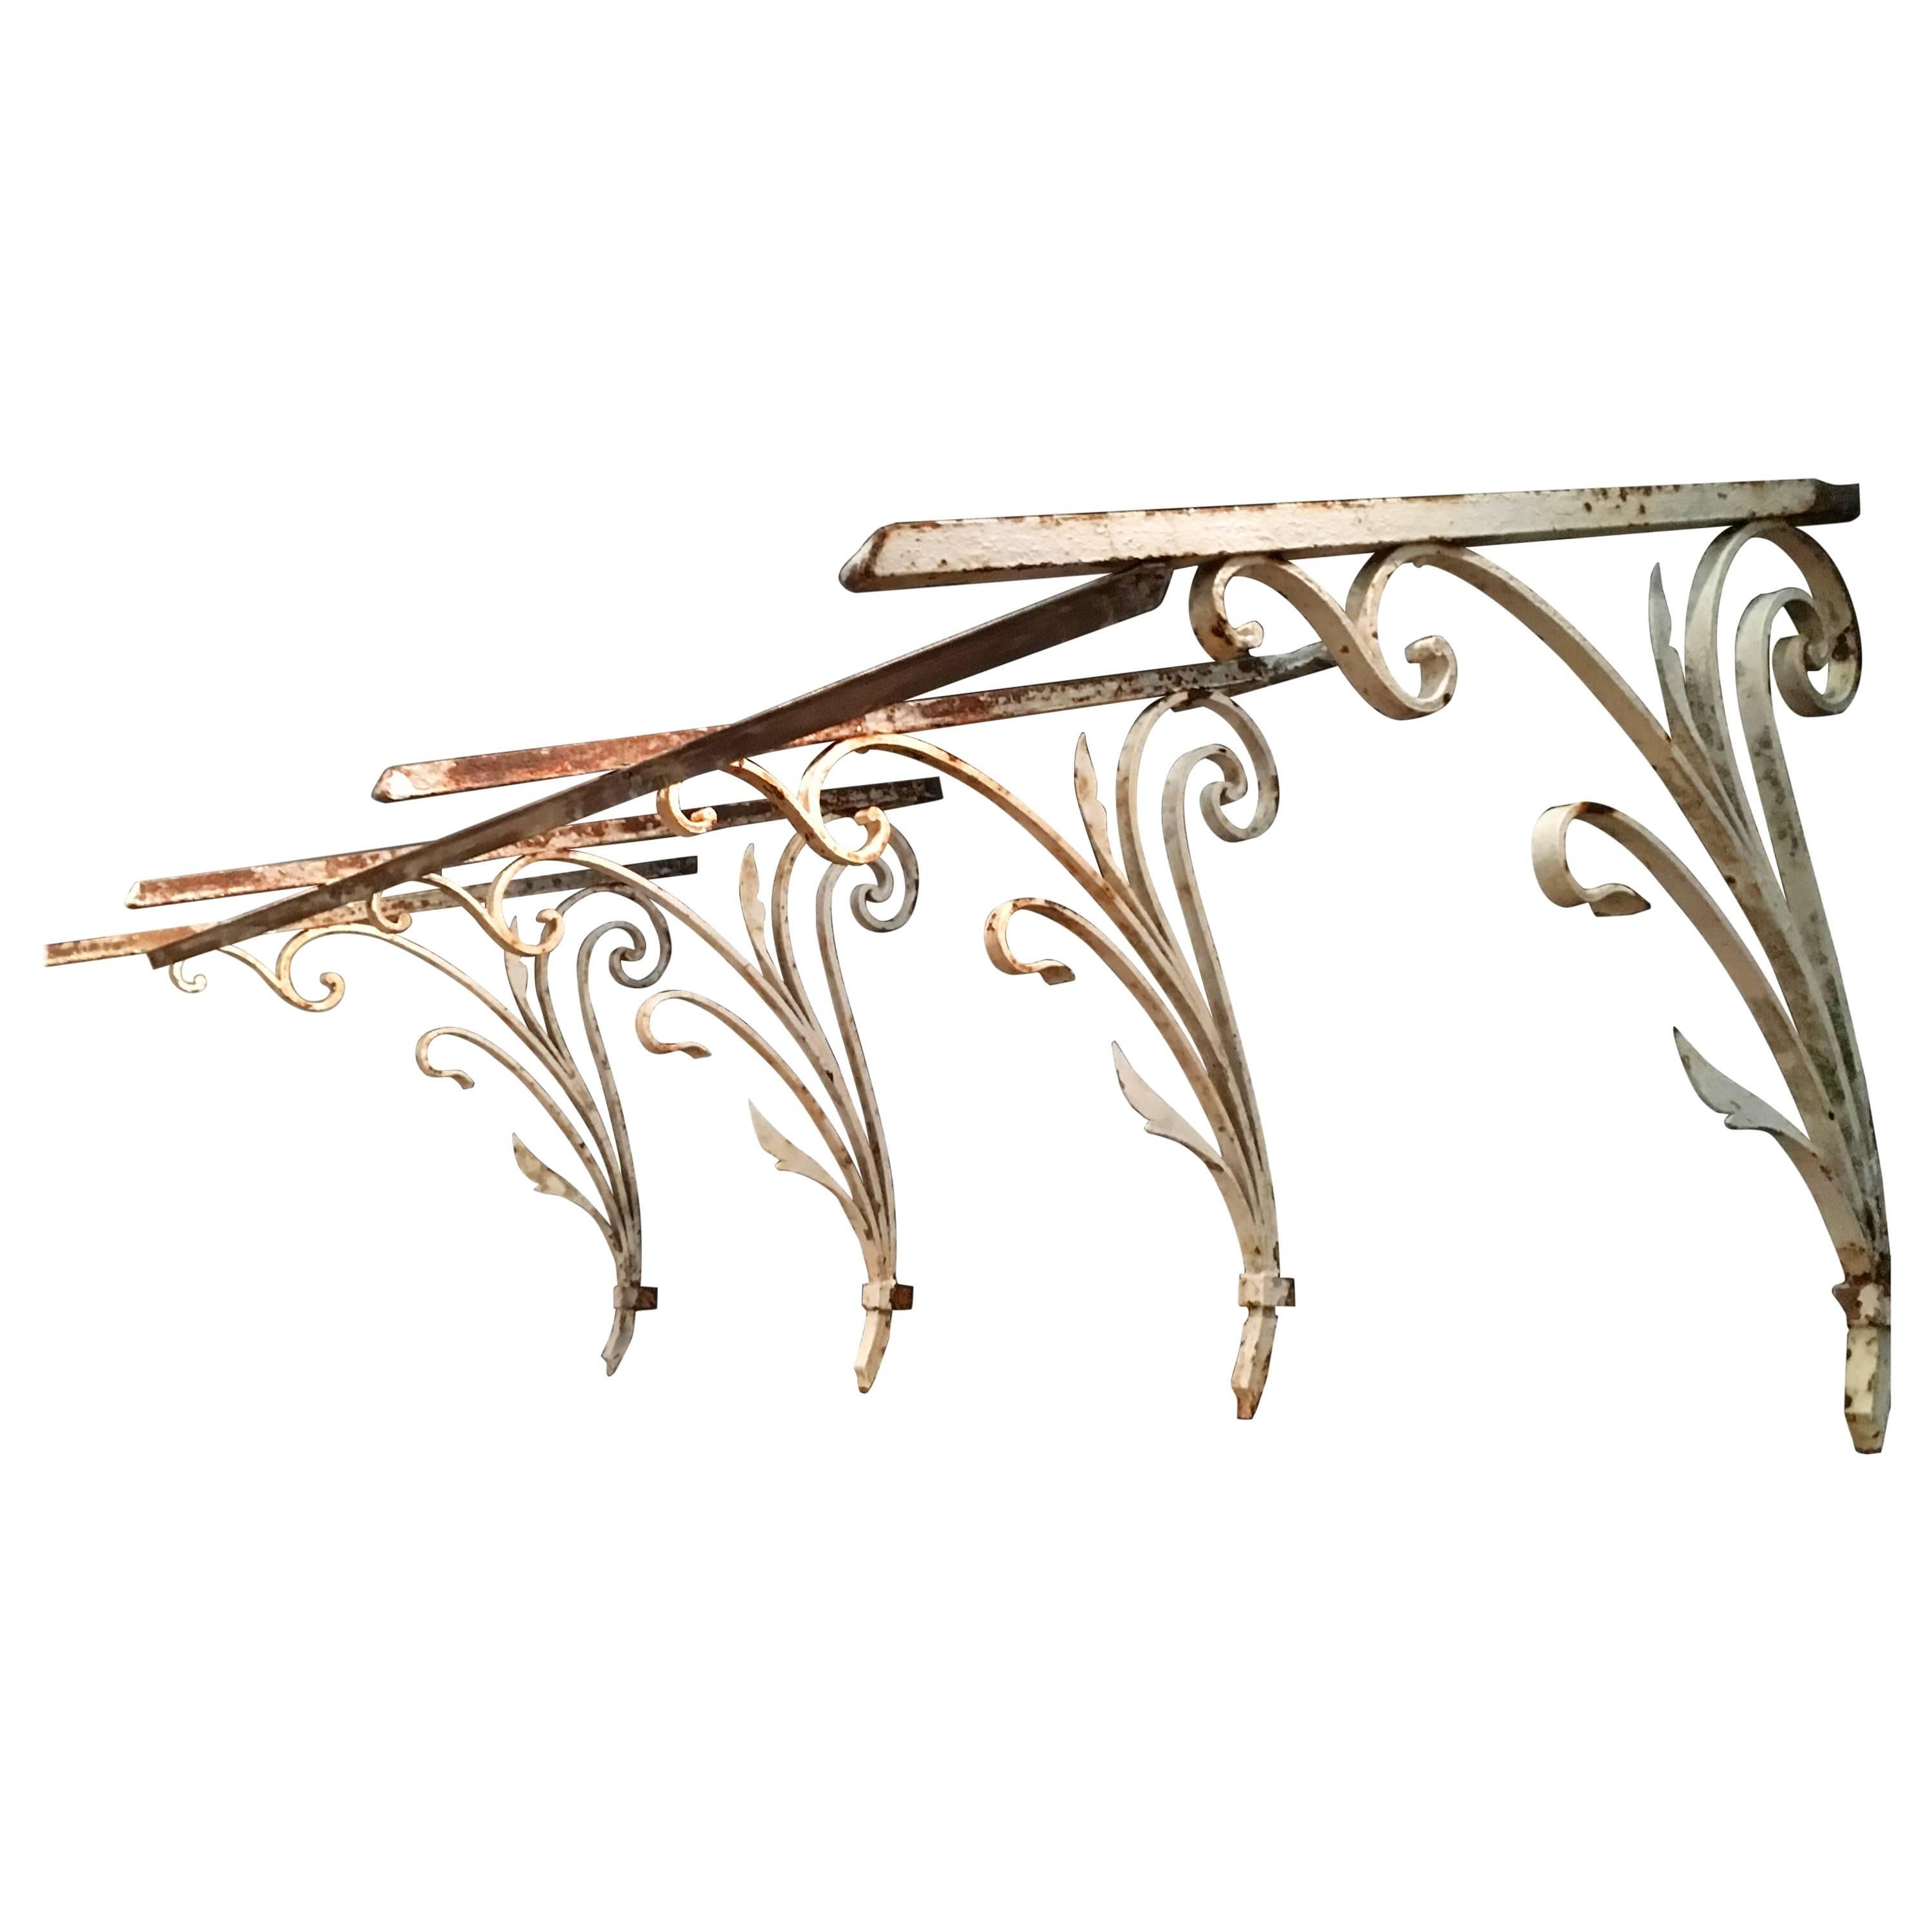 French Art Nouveau Wrought Iron Marquis or Arbor